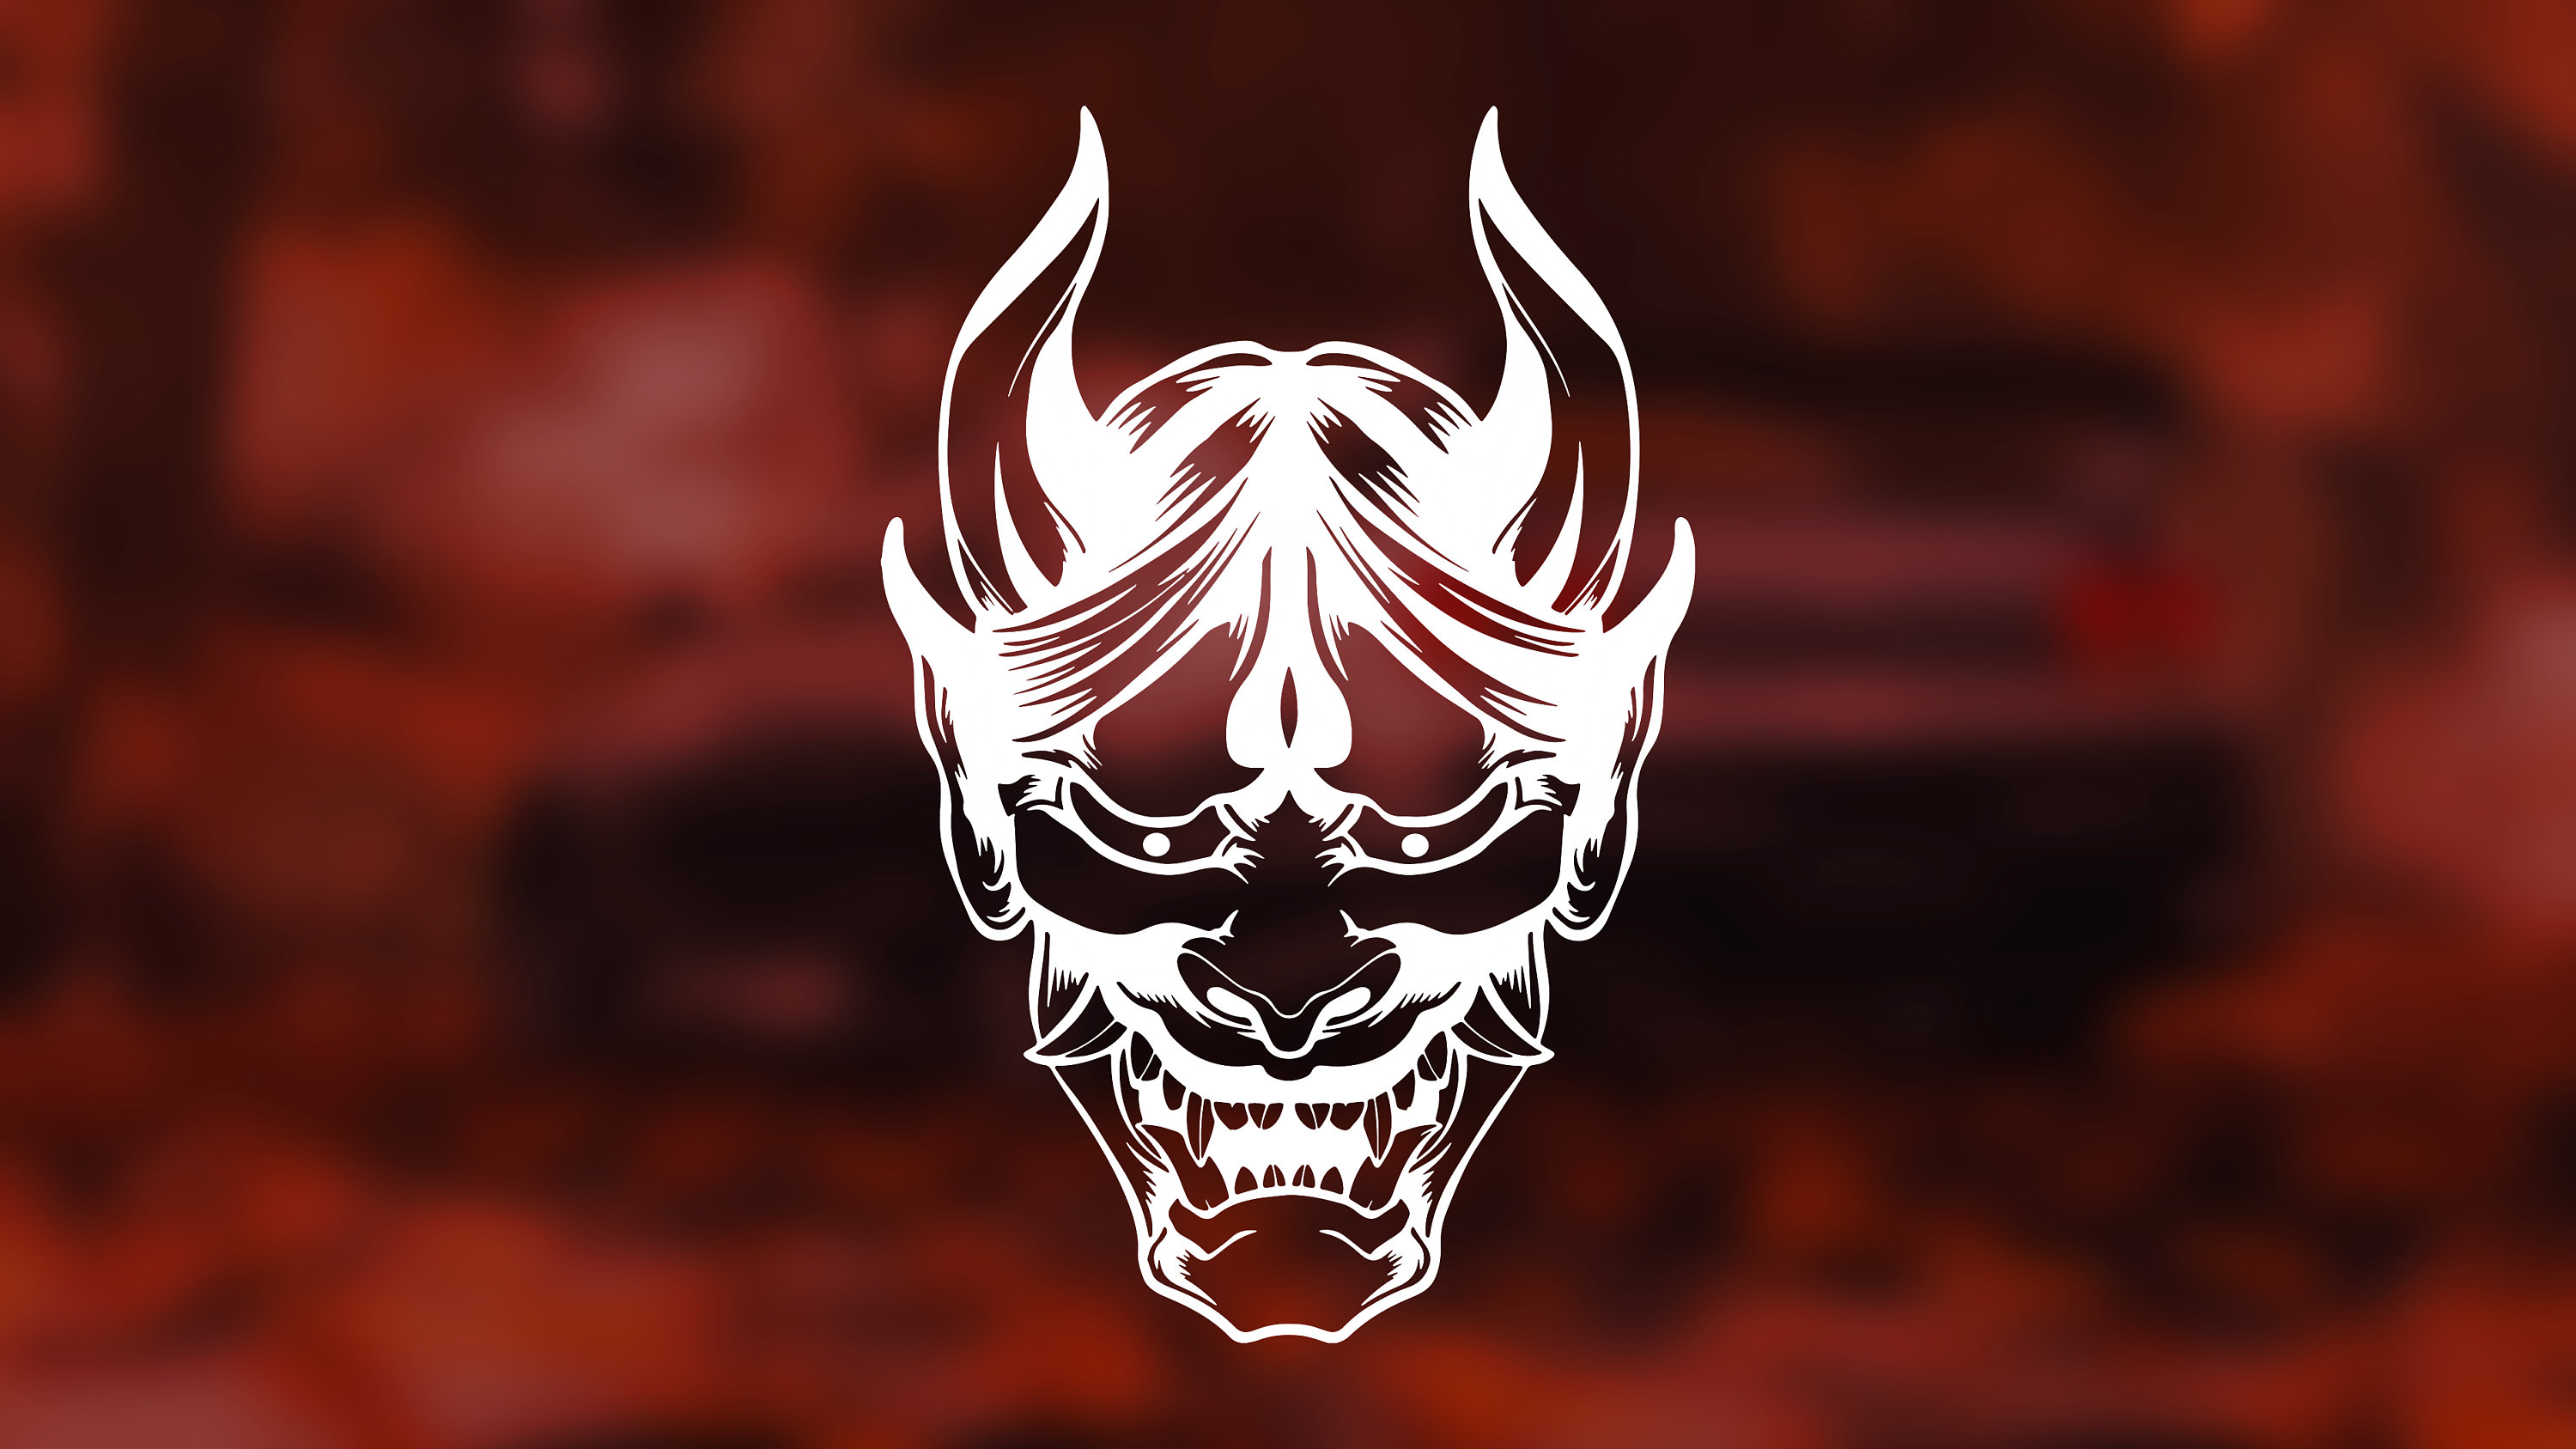 Oni Mask JDM Decal Japanese Decal Car Decal JDM Decal